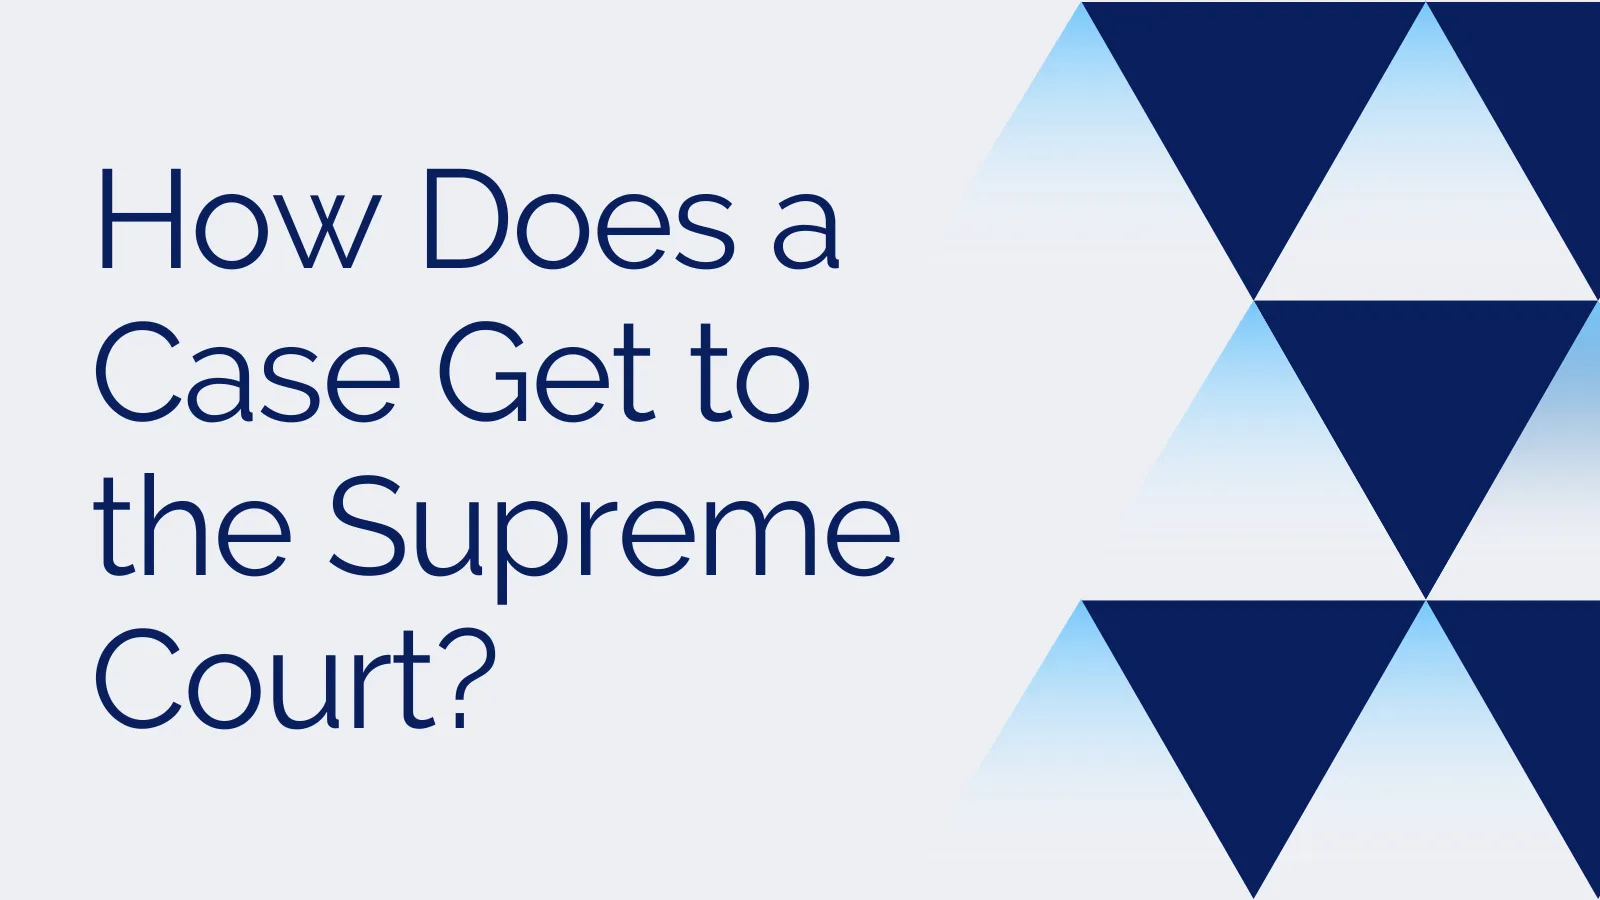 How Does a Case Get to the Supreme Court